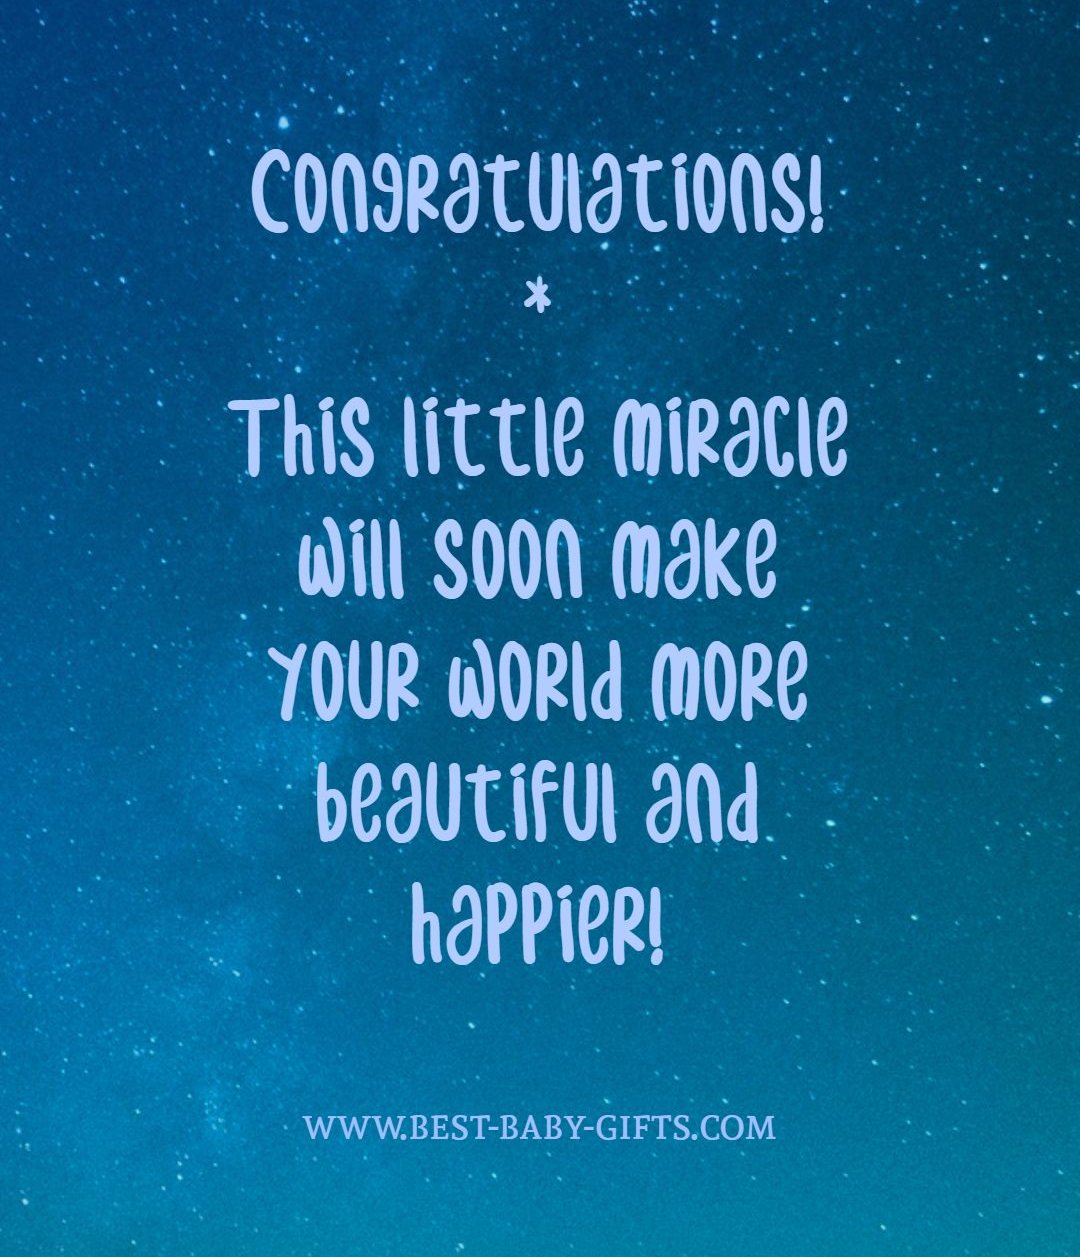 Baby Shower Cards - what to write in your baby shower congratulations